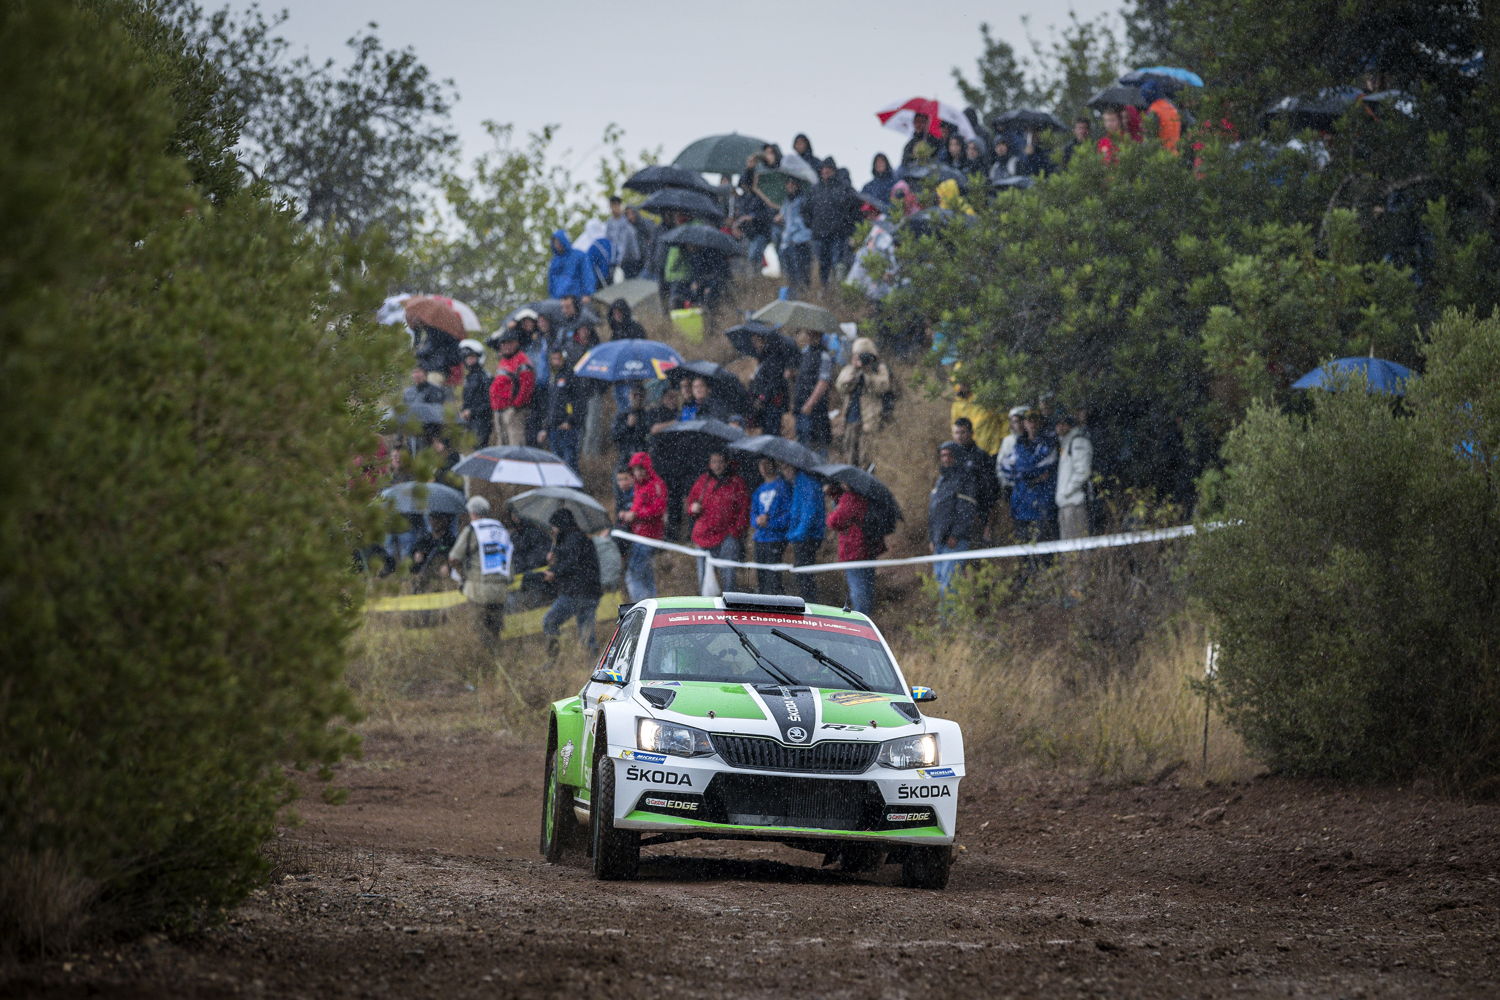 The second ŠKODA works duo Pontus Tidemand/Jonas Andersson (S/S) is in the lead in the WRC 2 going into the final weekend, which gives them a good chance of repeating last year's win.